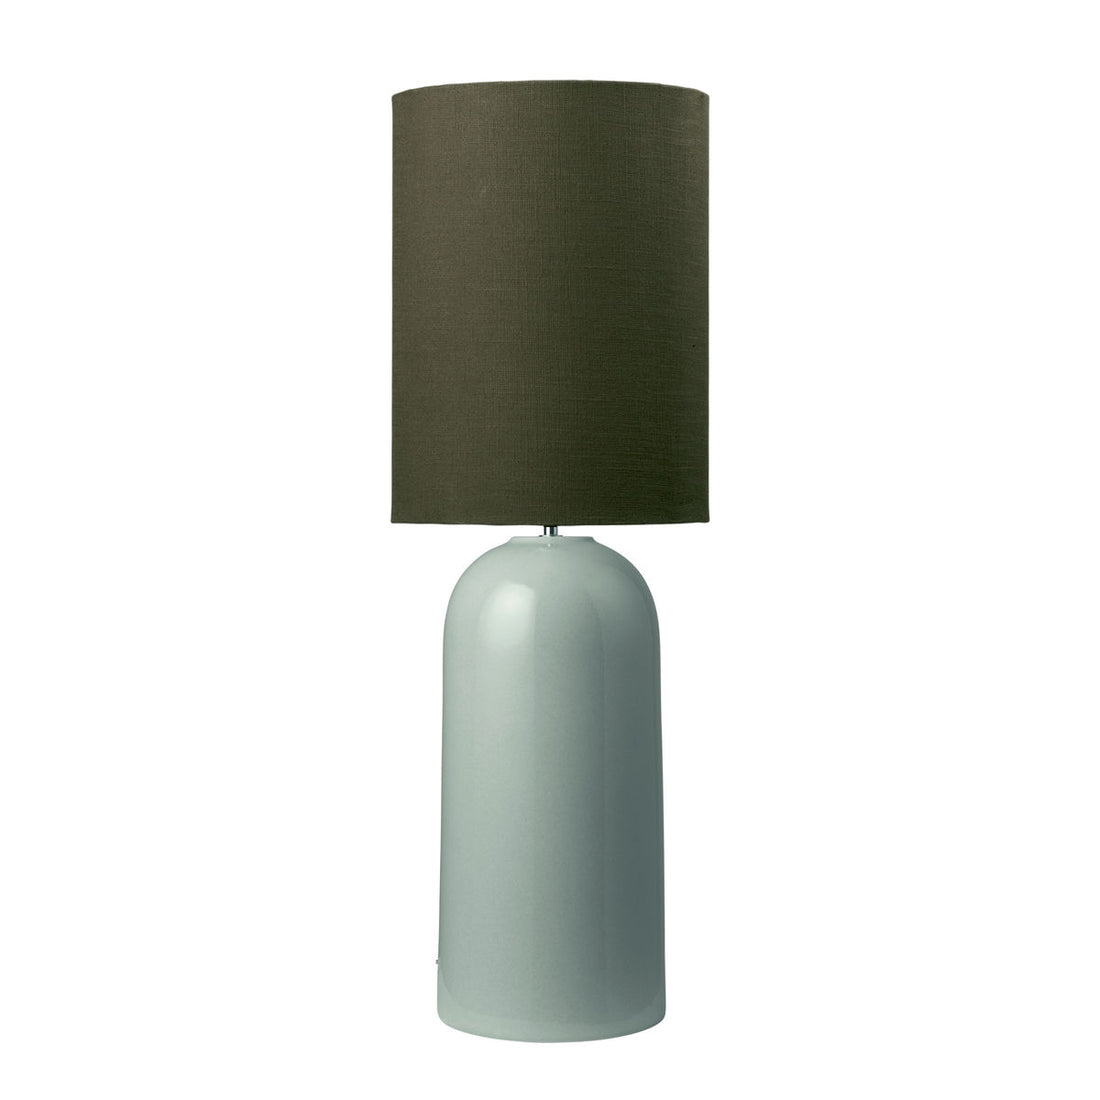 Cozy Living Asla Lamp w. Lampshade - SEAGRASS w. ARMY shade